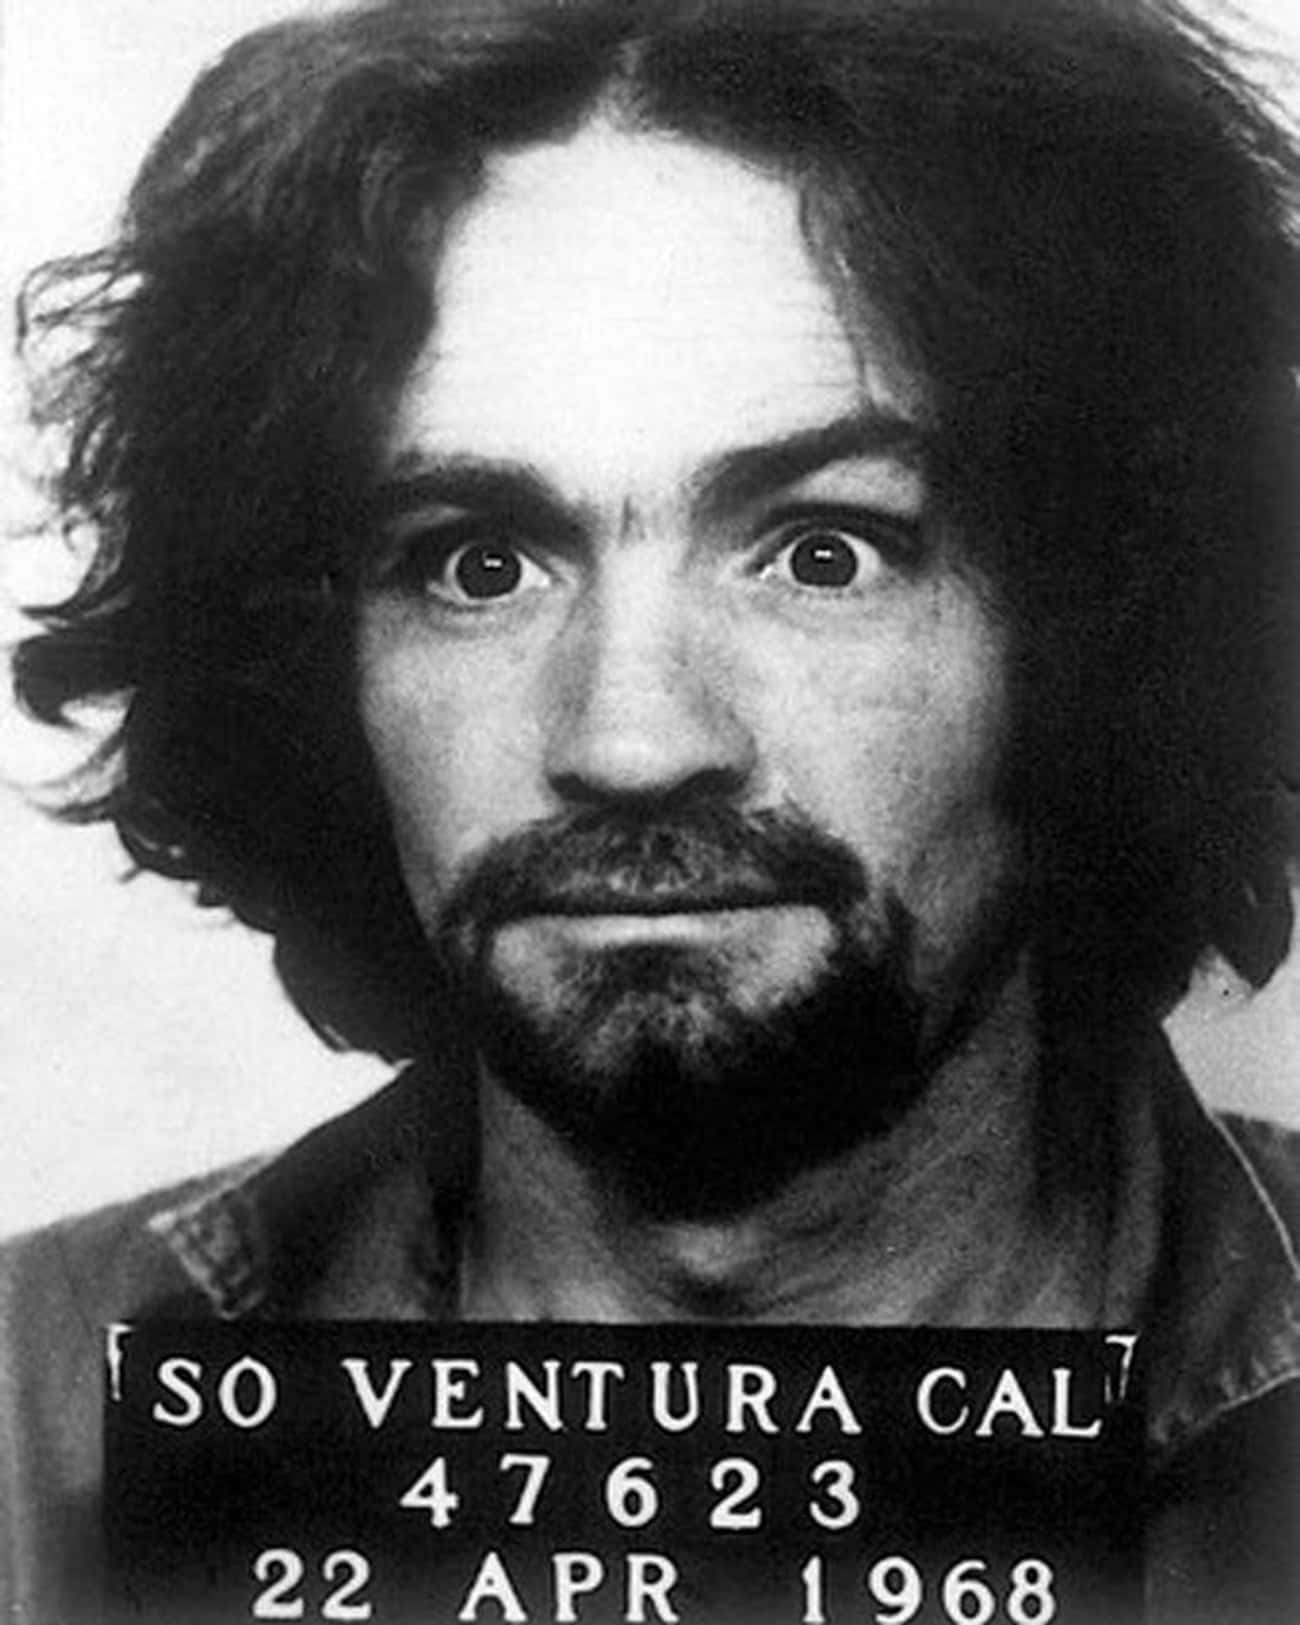 Some Think The Manson Family Murders Were A CIA Conspiracy